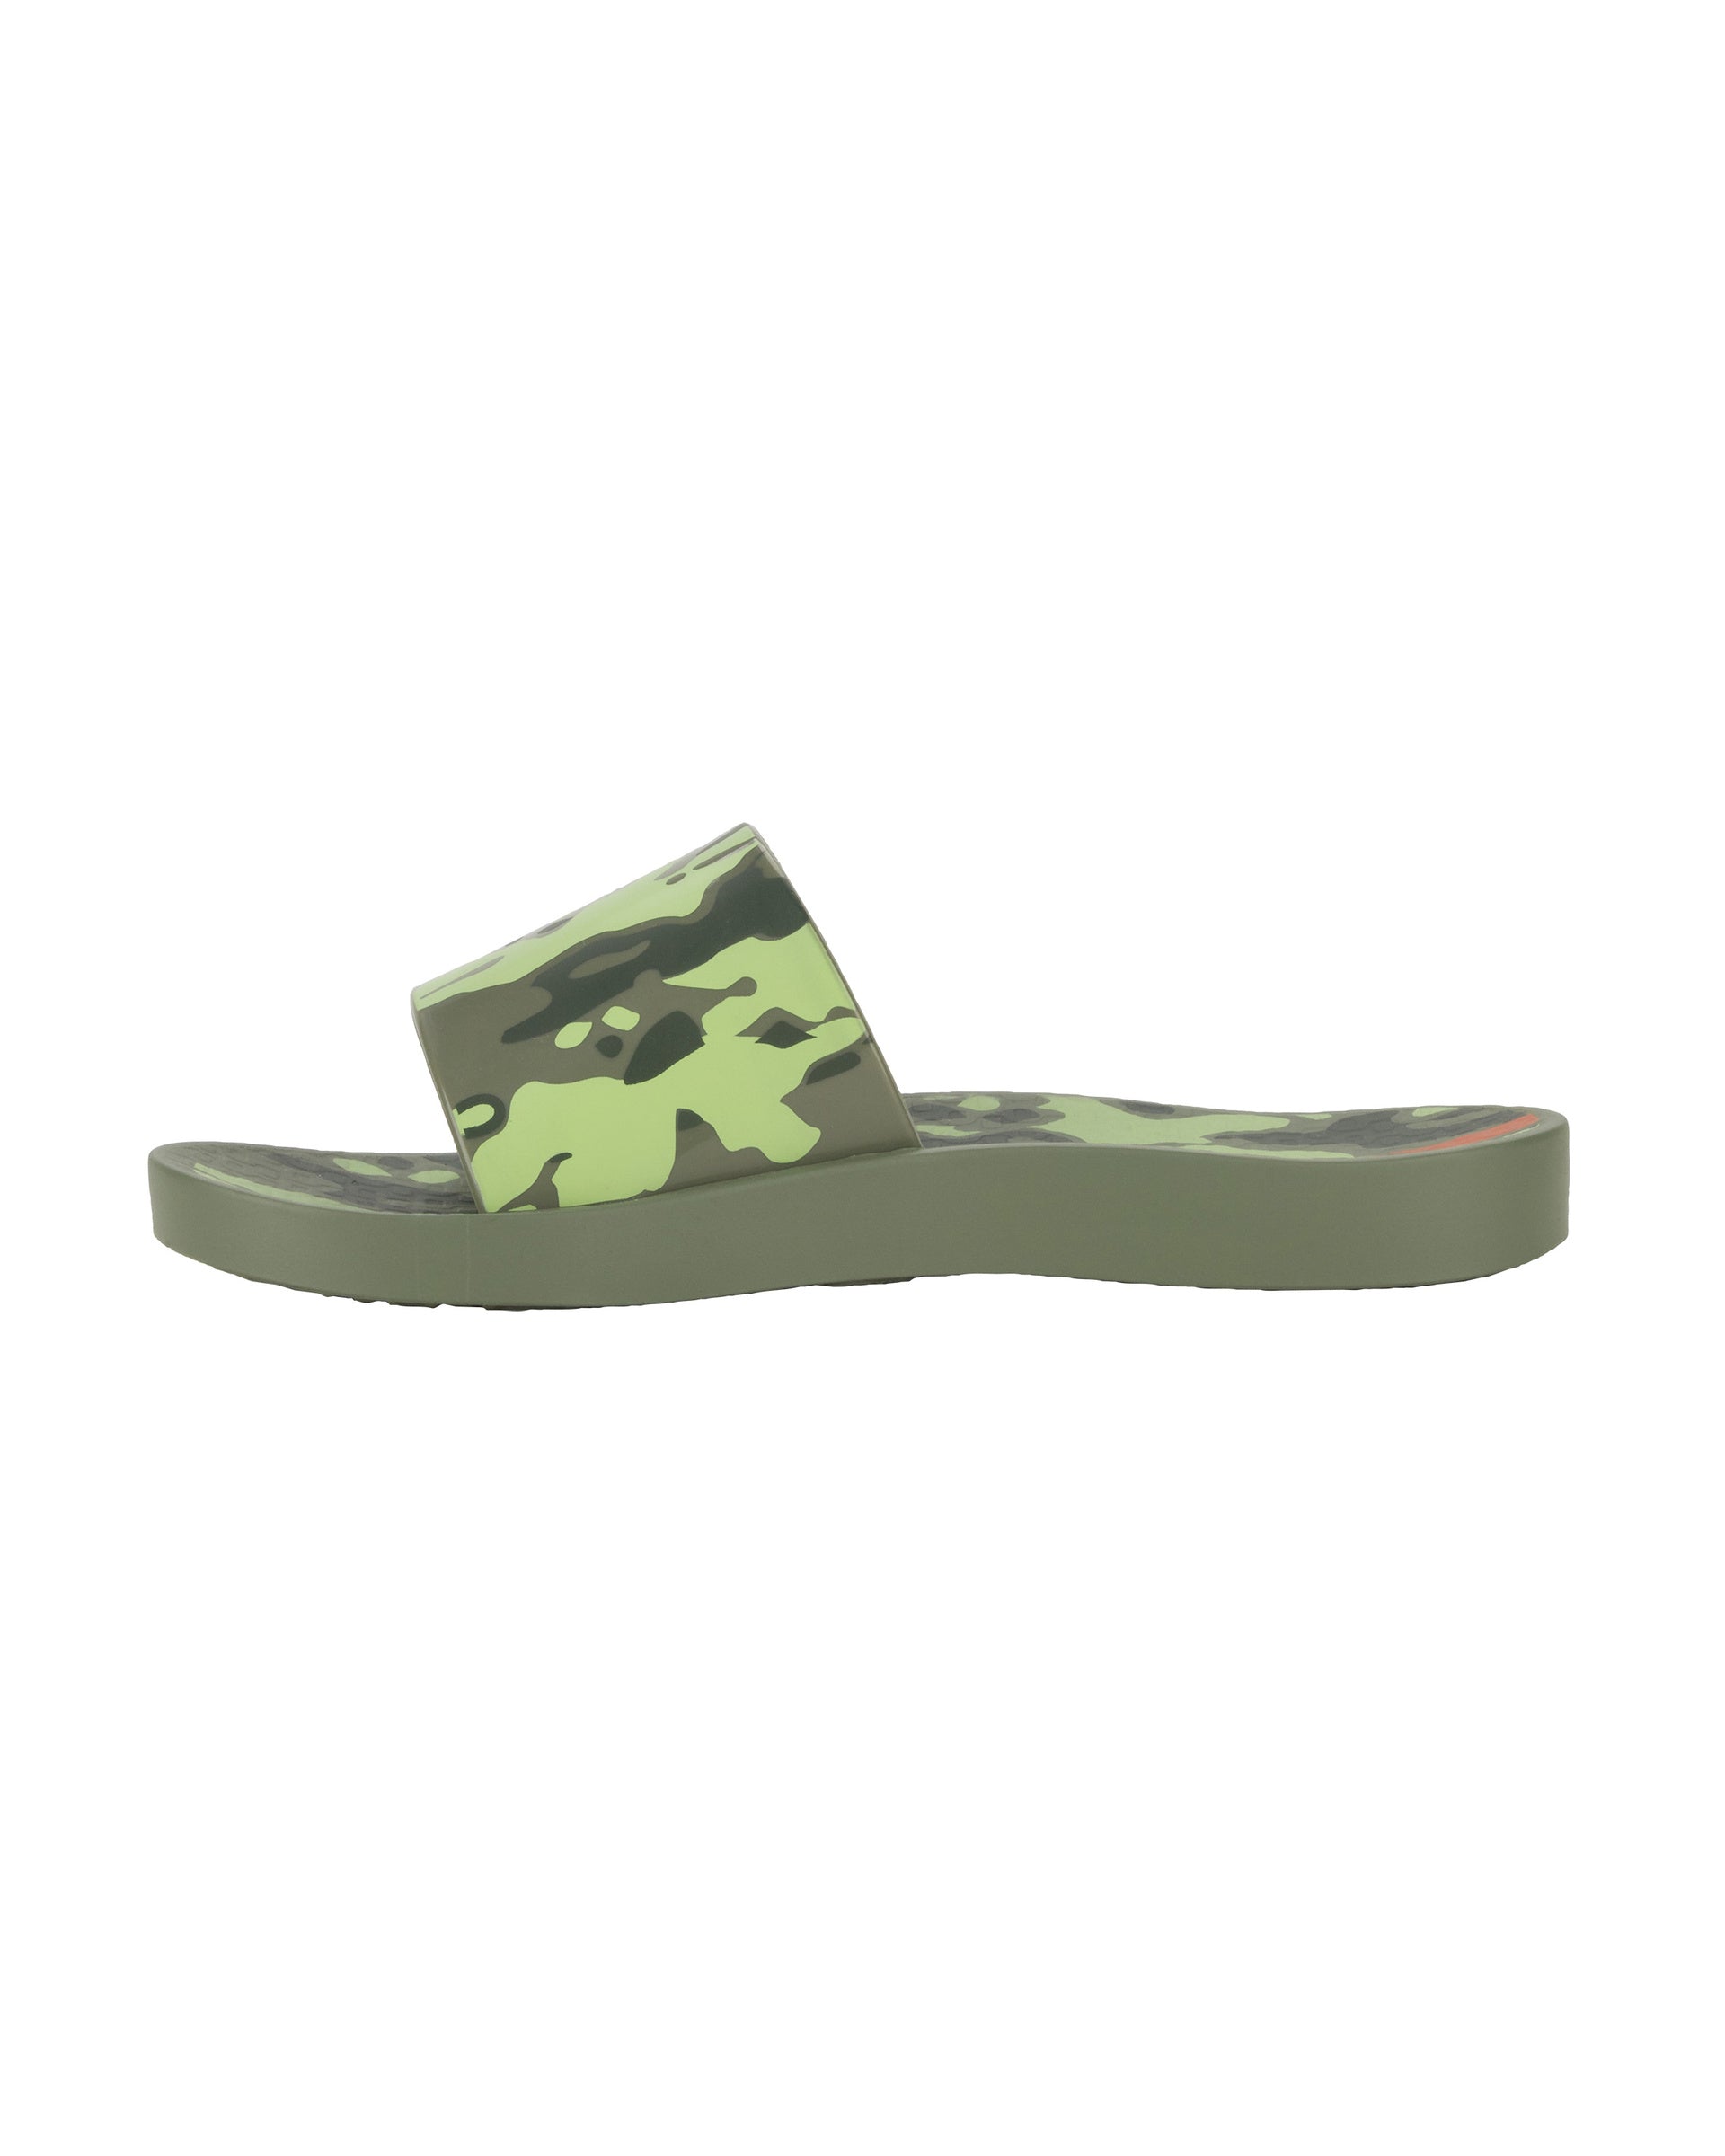 Inner side view of a green Ipanema Urban kids slide with a camo print on the upper.